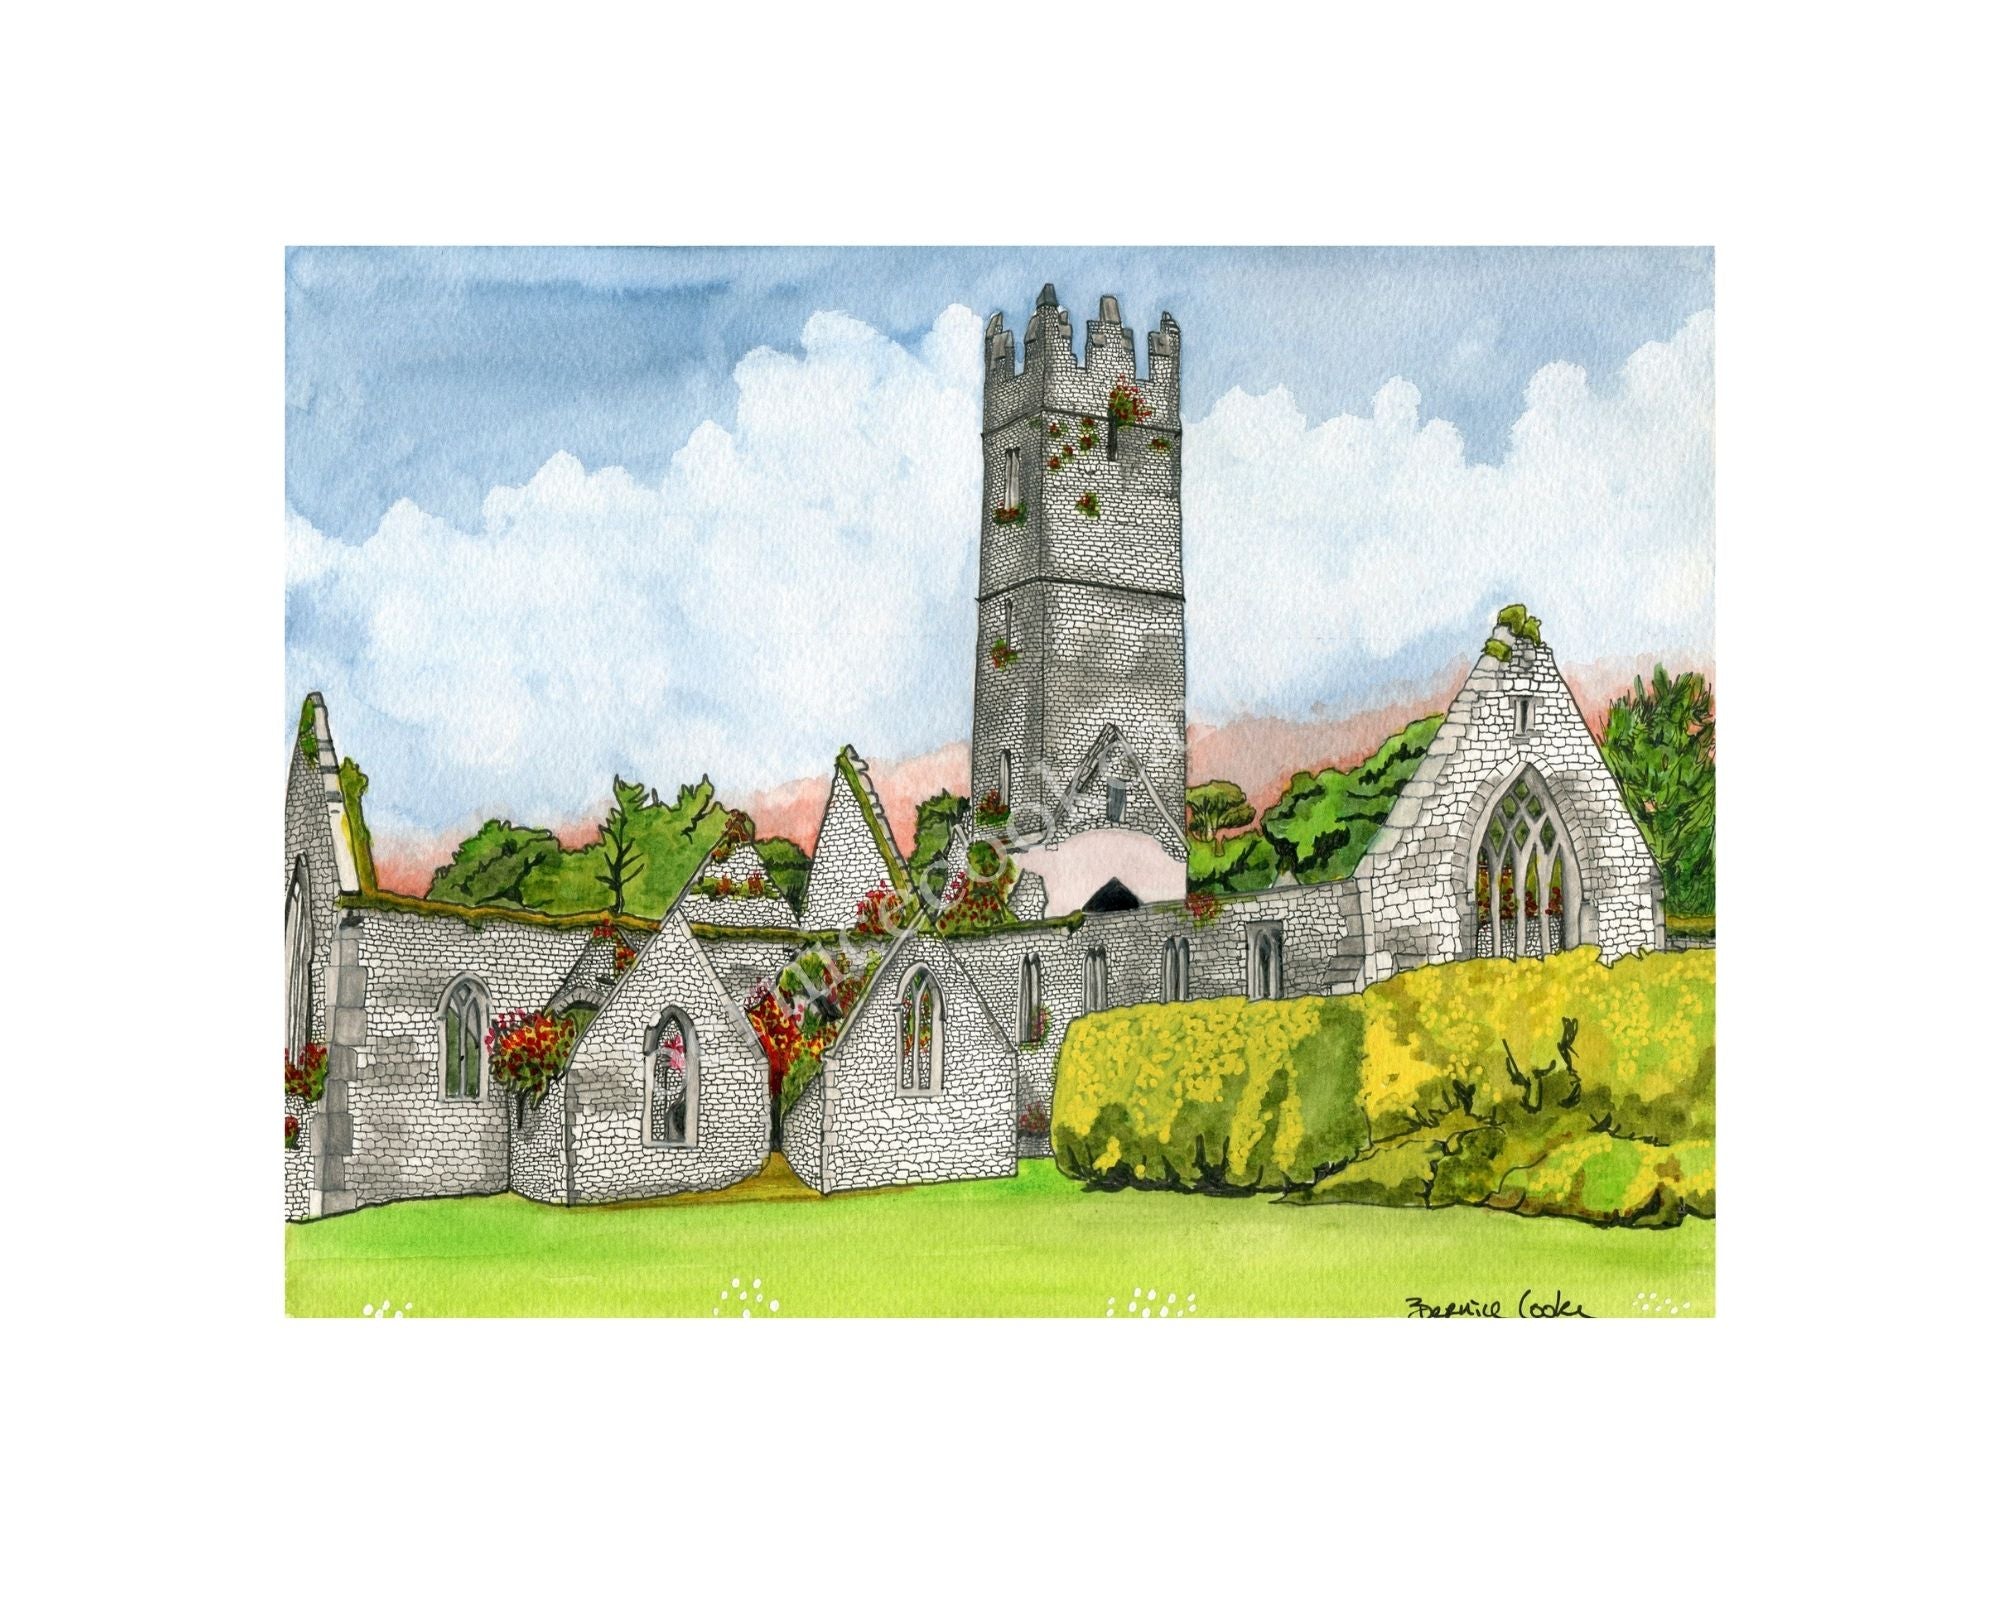 Adare Franciscan Friary, Adare, Co. Limerick - Pen & Watercolor Sketch - Giclée Print by Bernice Cooke - Mounted to 10" x 8"